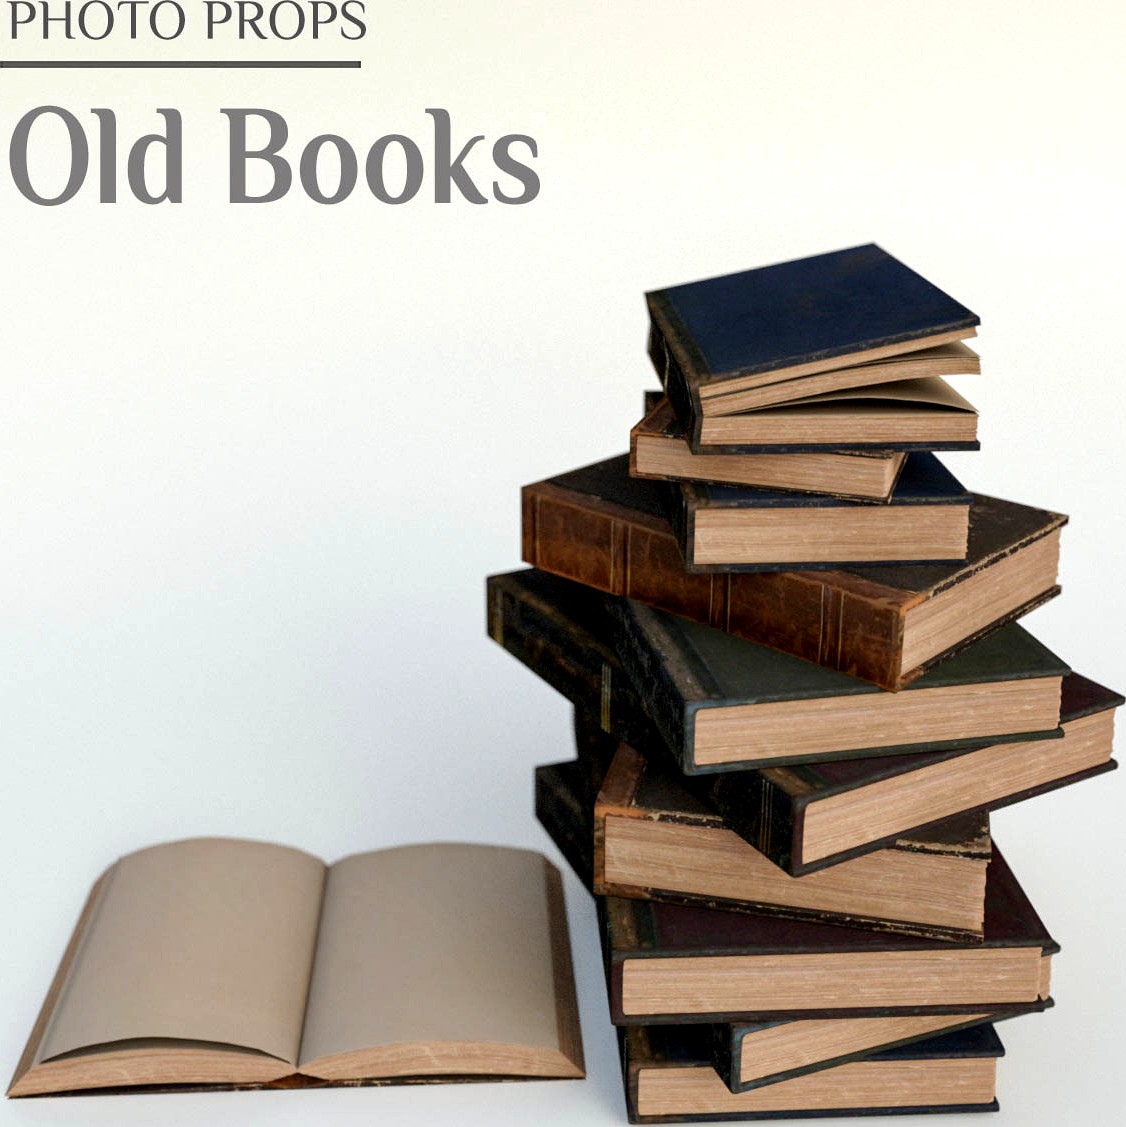 Photo Props: Old Books - Extended License